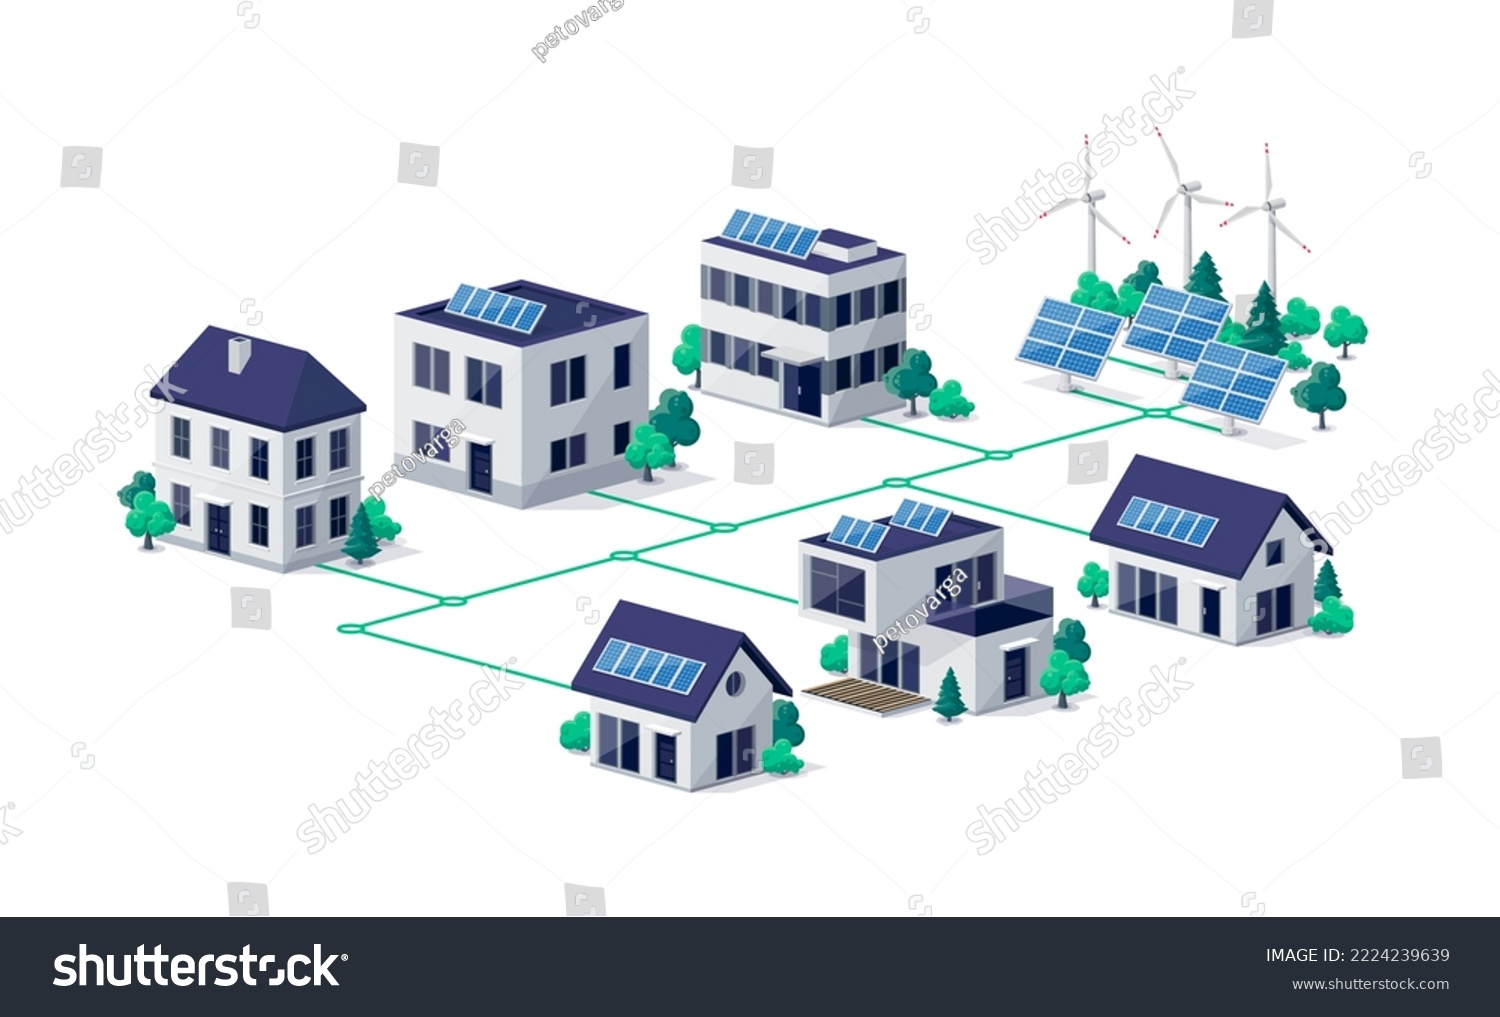 SVG of Residential city town buildings connected to renewable solar wind power generation stations. Photovoltaic panels on house roof. Green smart cloud management sustainable electricity grid system.  svg